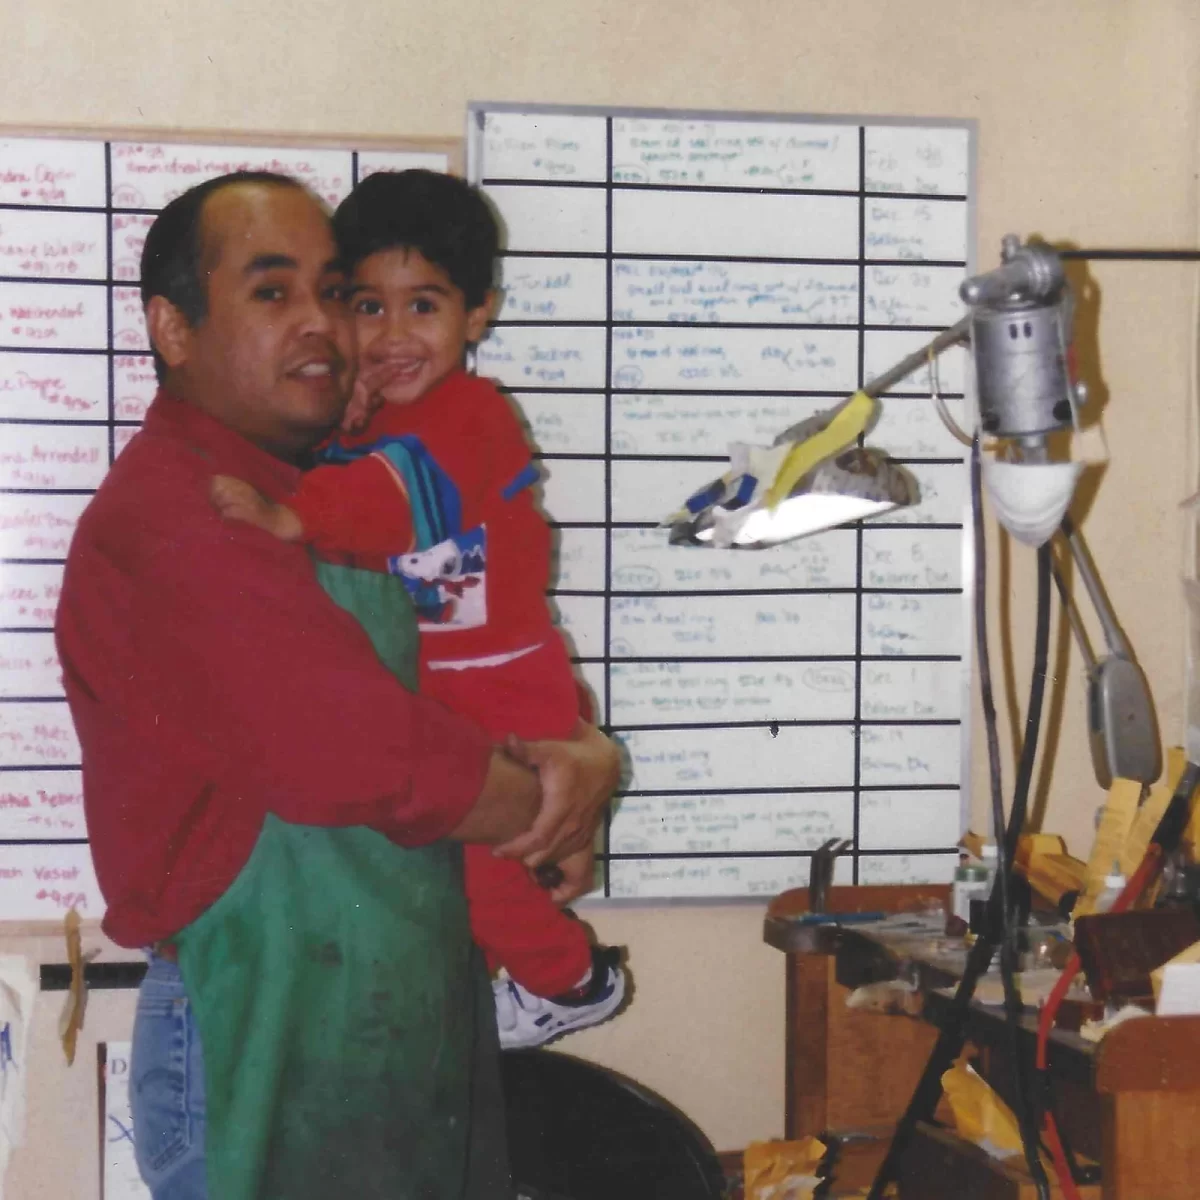 Robert Jimenez (left) carries his son Adam Jimenez (right) while making jewelry at the first shop for San Jose Jewelers, 1995, in Waco, Texas.